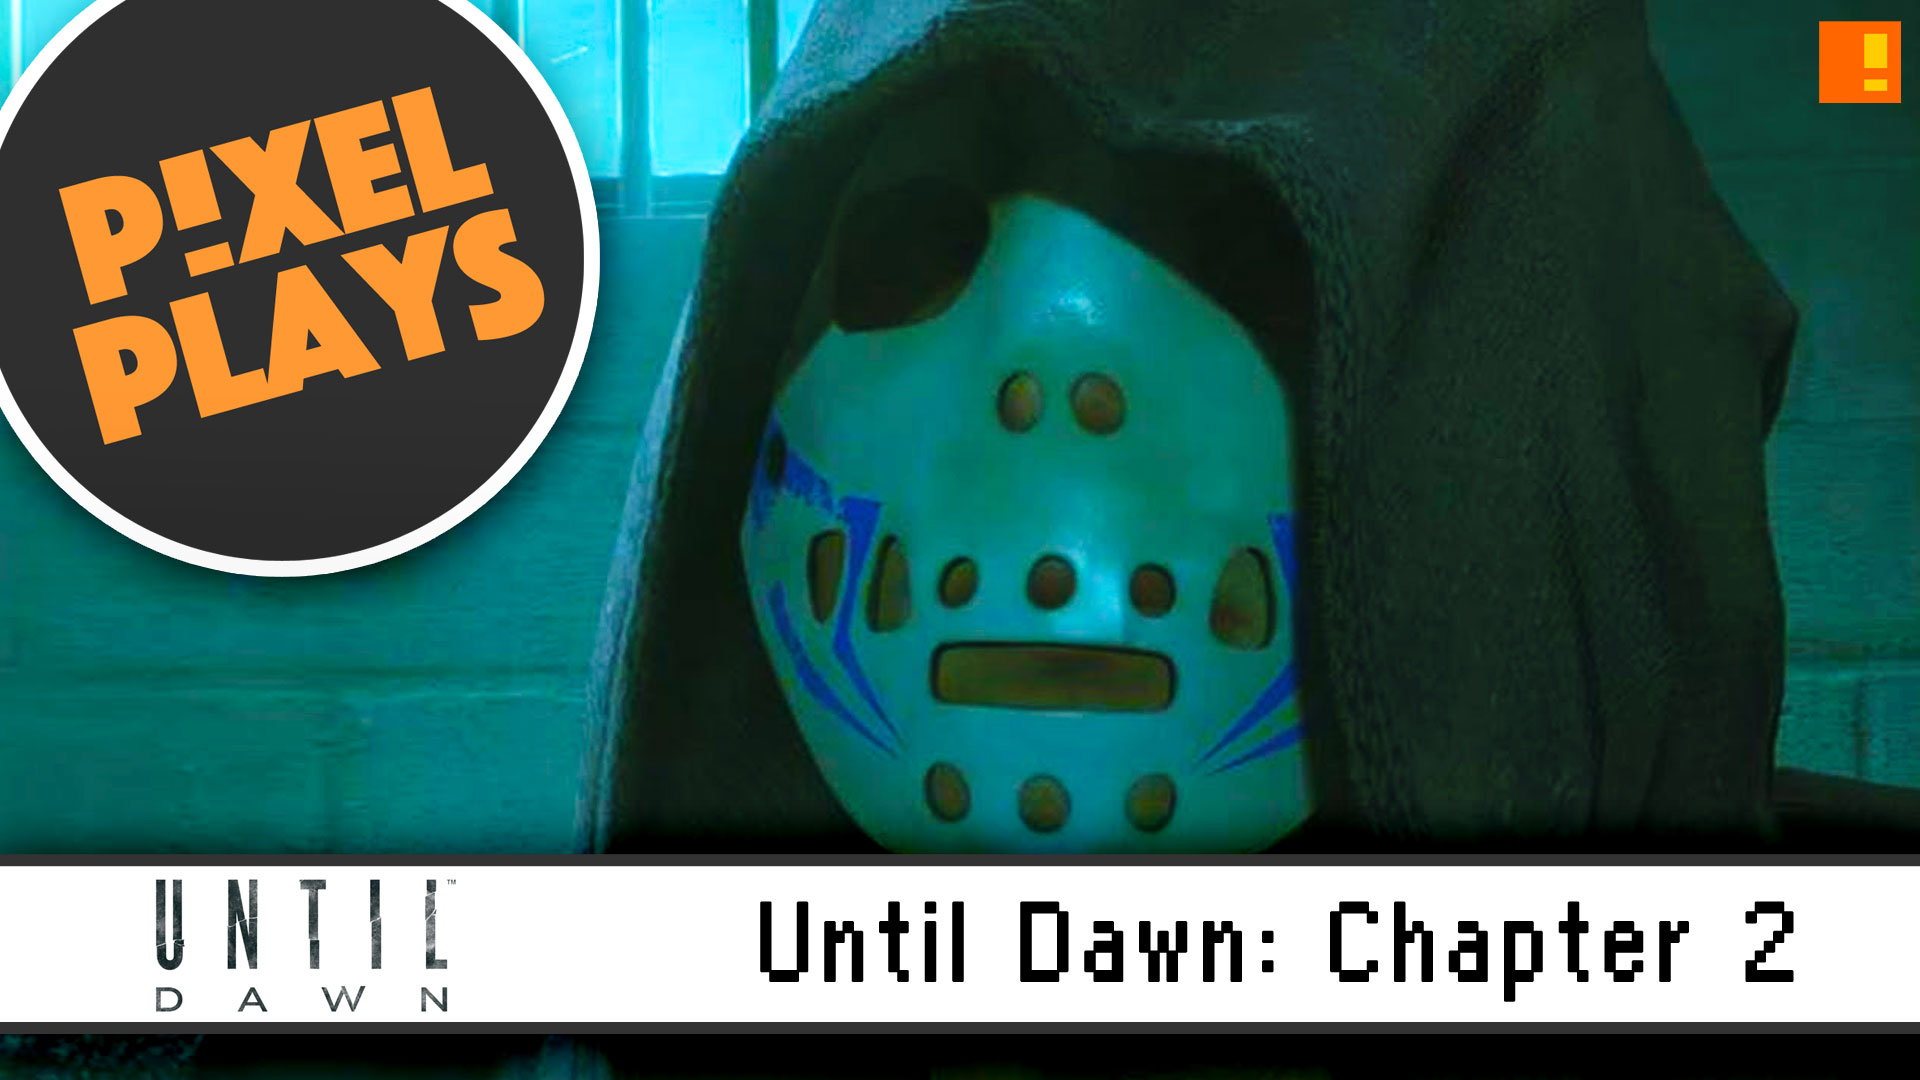 Pixel Plays | "Until Dawn": Chapter 2 - Jealousy . the action pixel. @theactionpixel